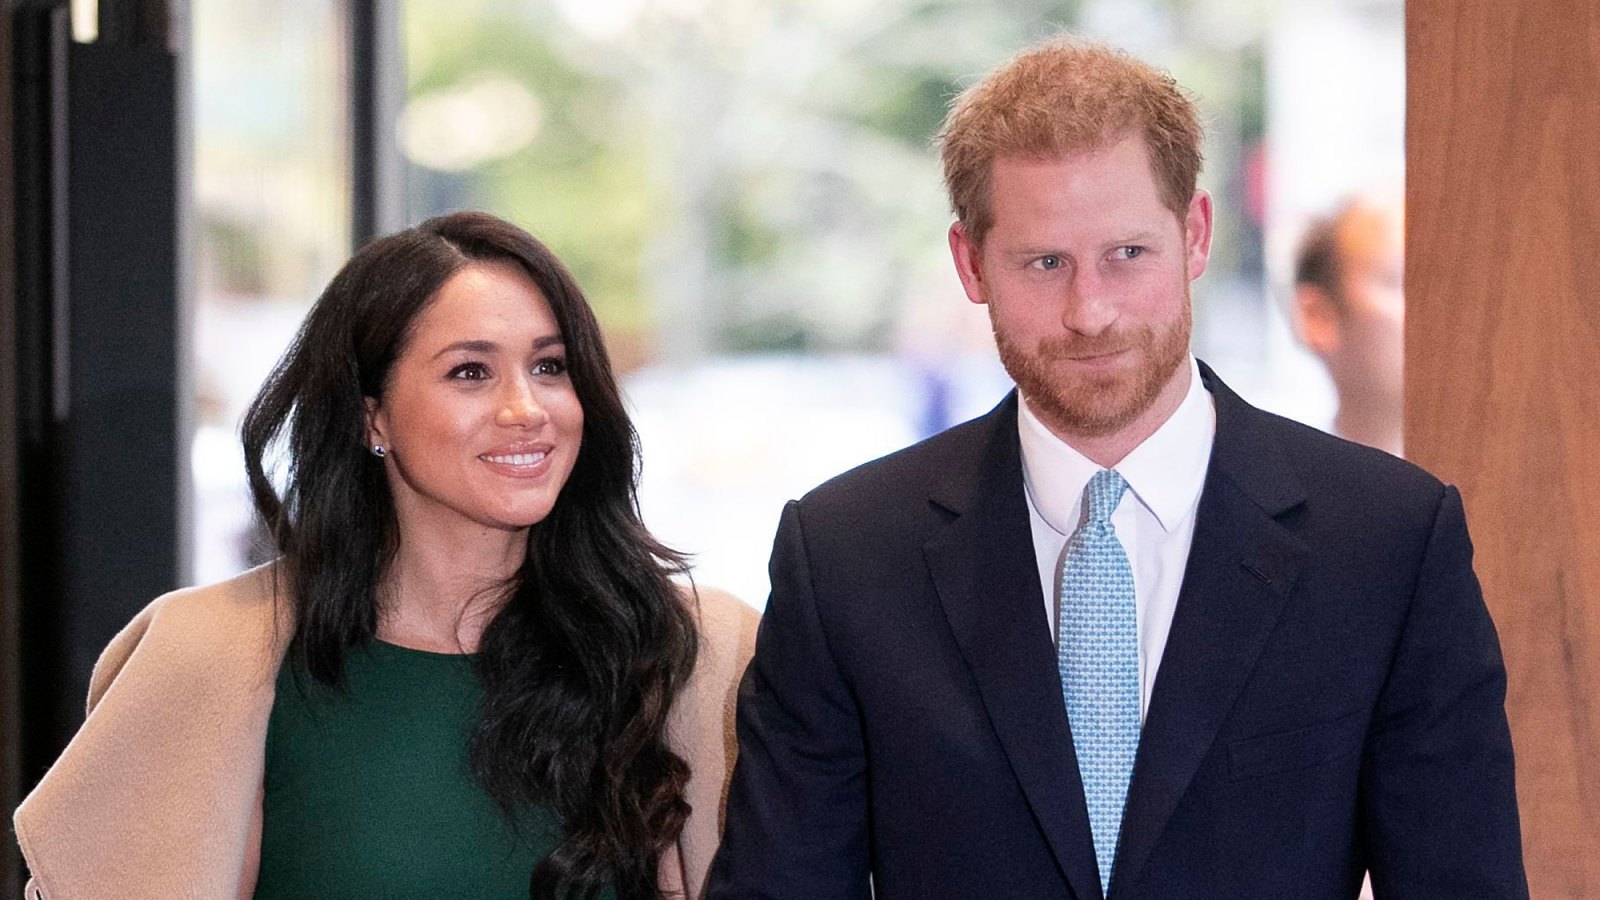 Prince Harry and Meghan Markle Spotted Together for the 1st Time Since Announcing Their Royal Exit